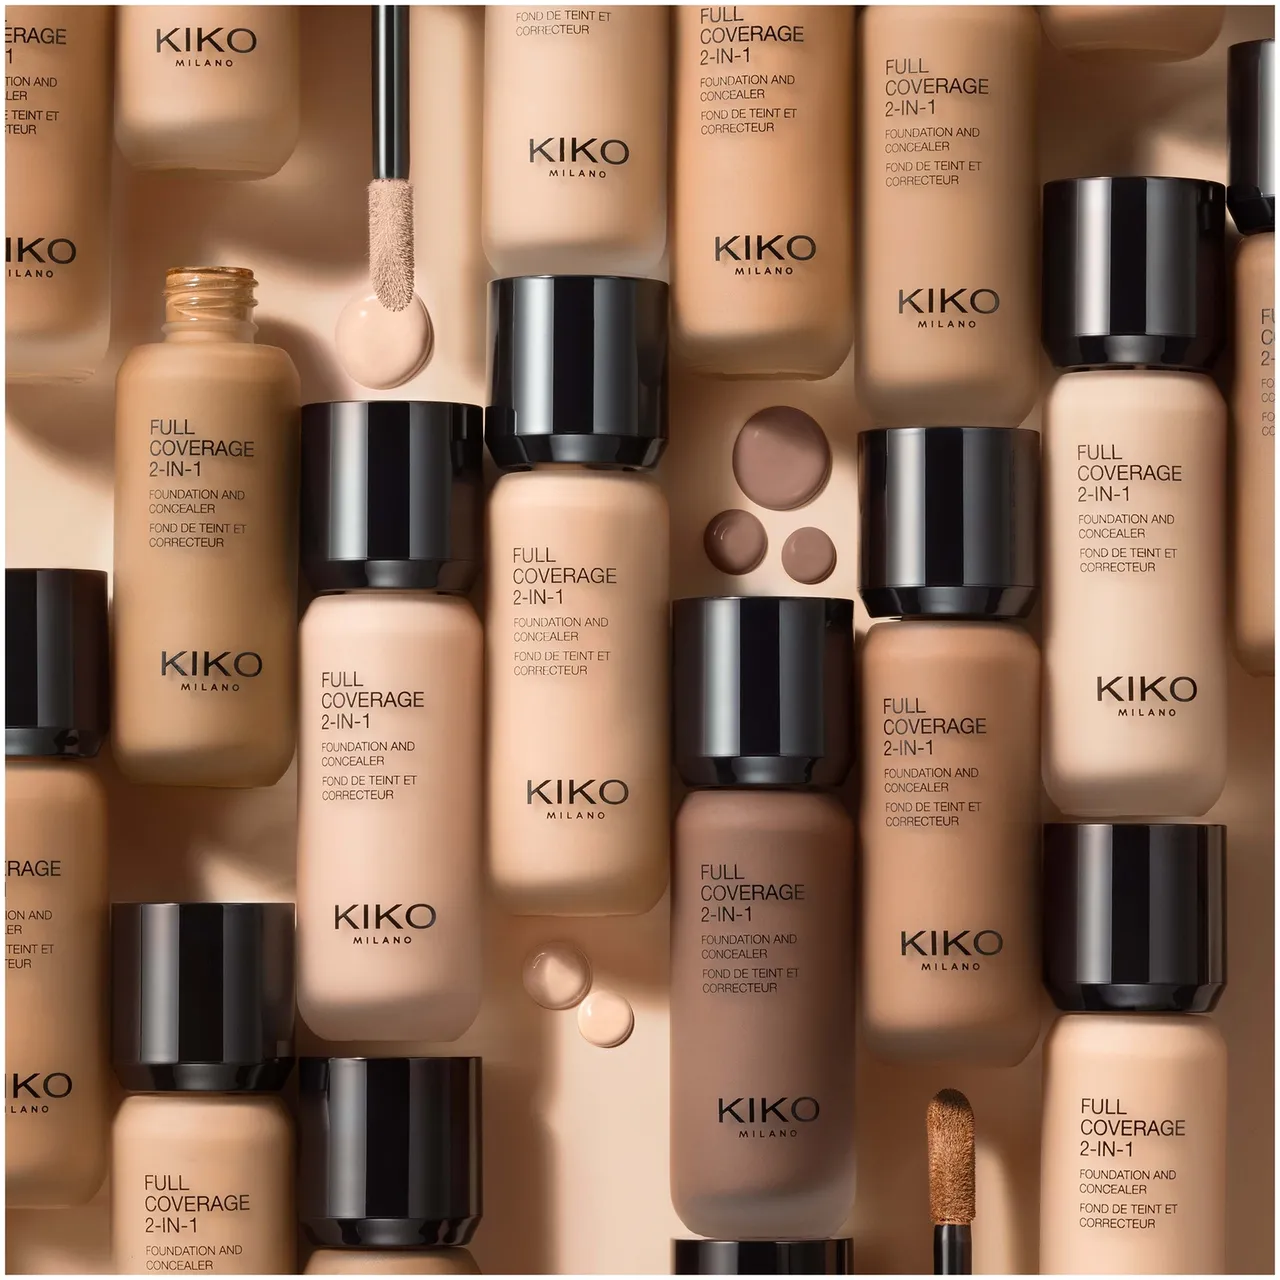 KIKO Milano Full Coverage 2-in-1 Foundation and Concealer 25ml (Various Shades) - 50 Warm Rose